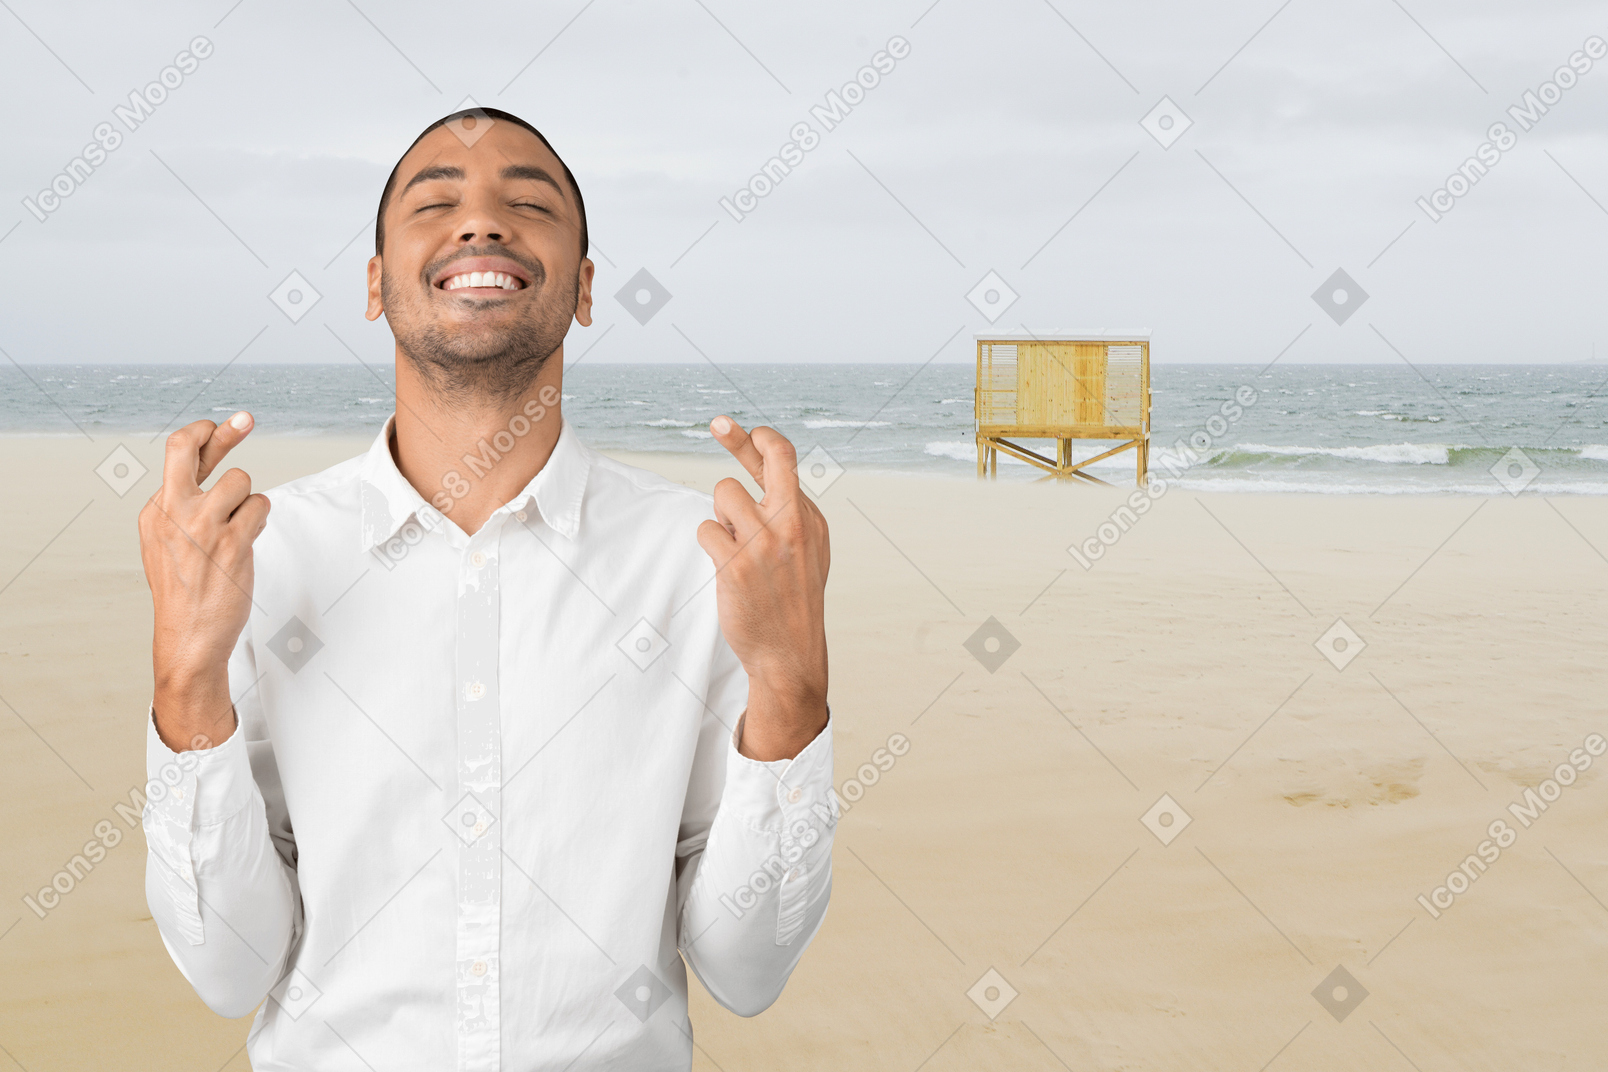 A man standing on a beach with his fingers crossed